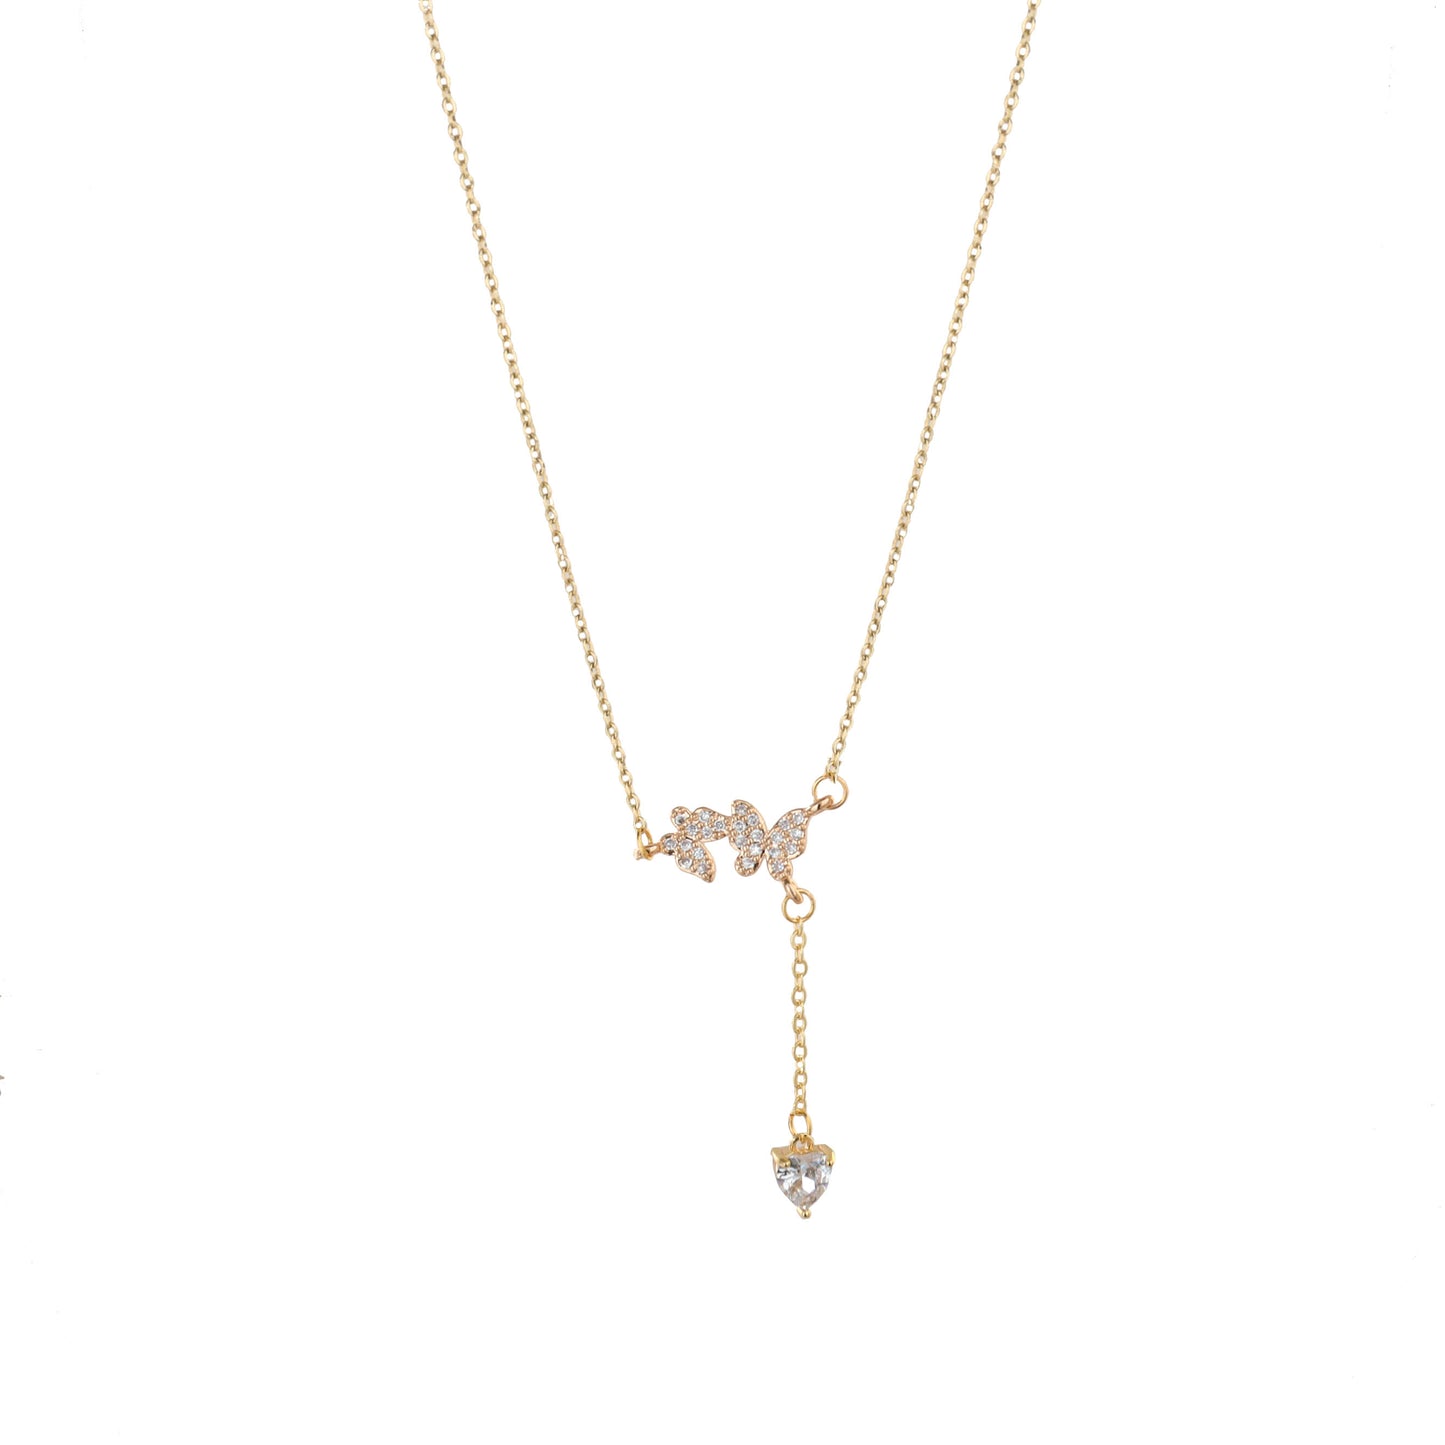 A Mood for Love Necklace